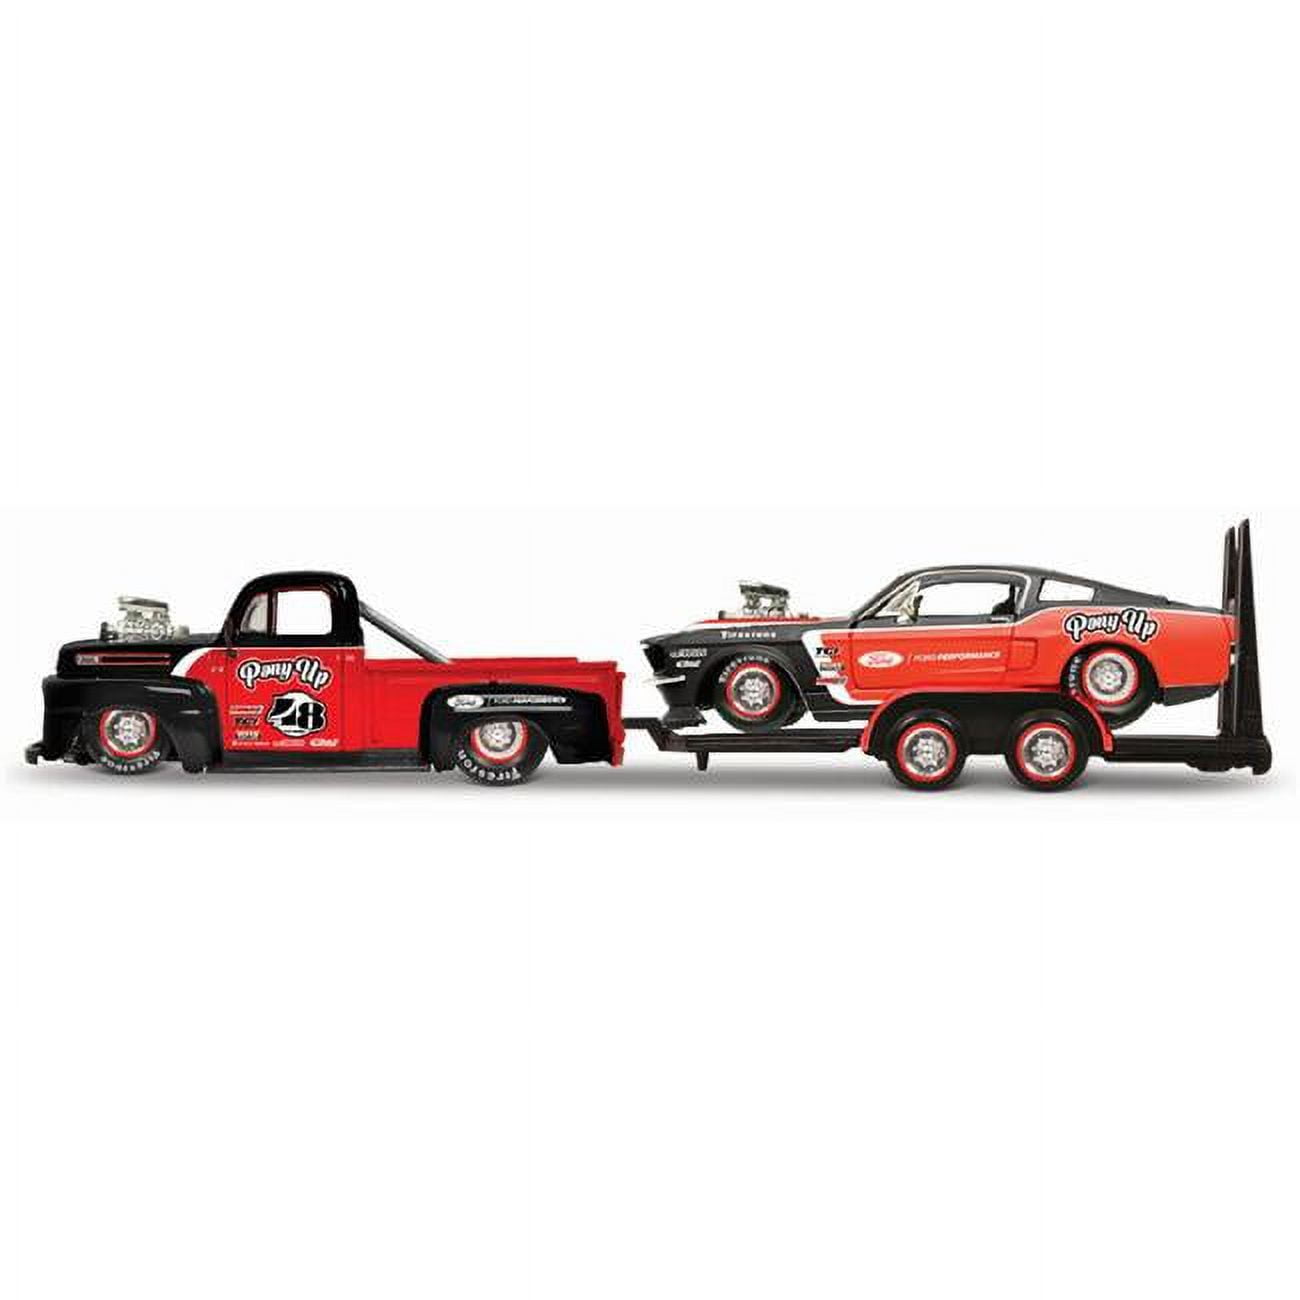 Maisto MAI32751 Pickup Truck with Flatbed Trailor for 1948 F1 Ford & 1967 Ford Mustang GT -  Maisto International Inc